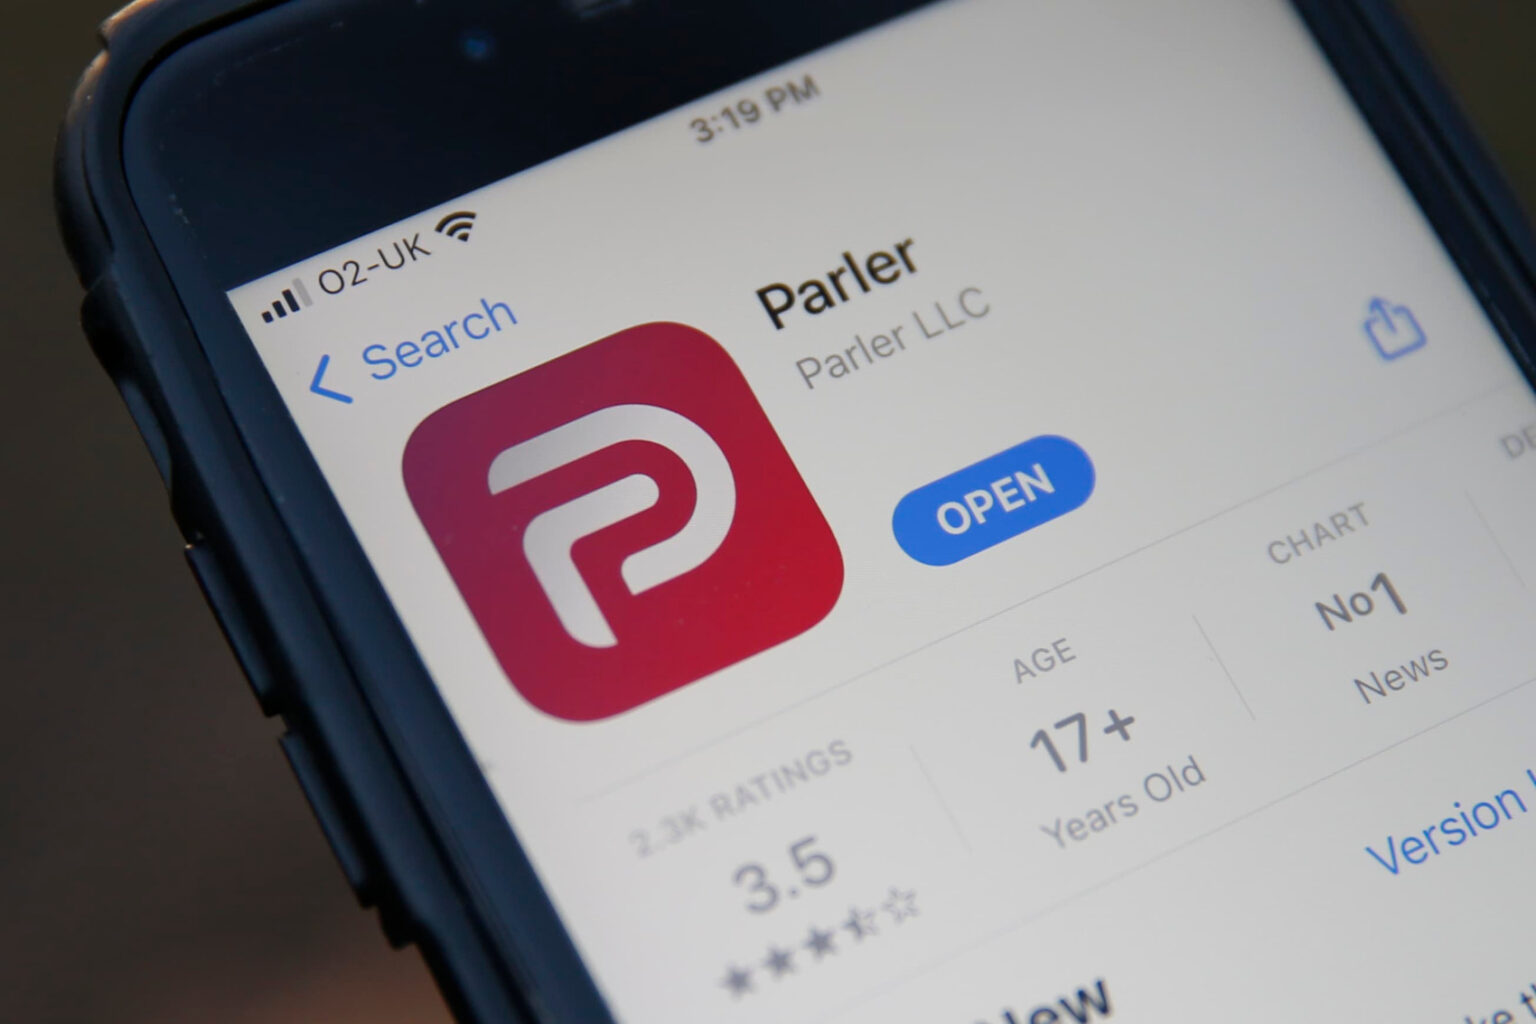 The Parler app is back on Apple. Check out its new rules and regulations and see if it will be available on Google or Amazon in the future.